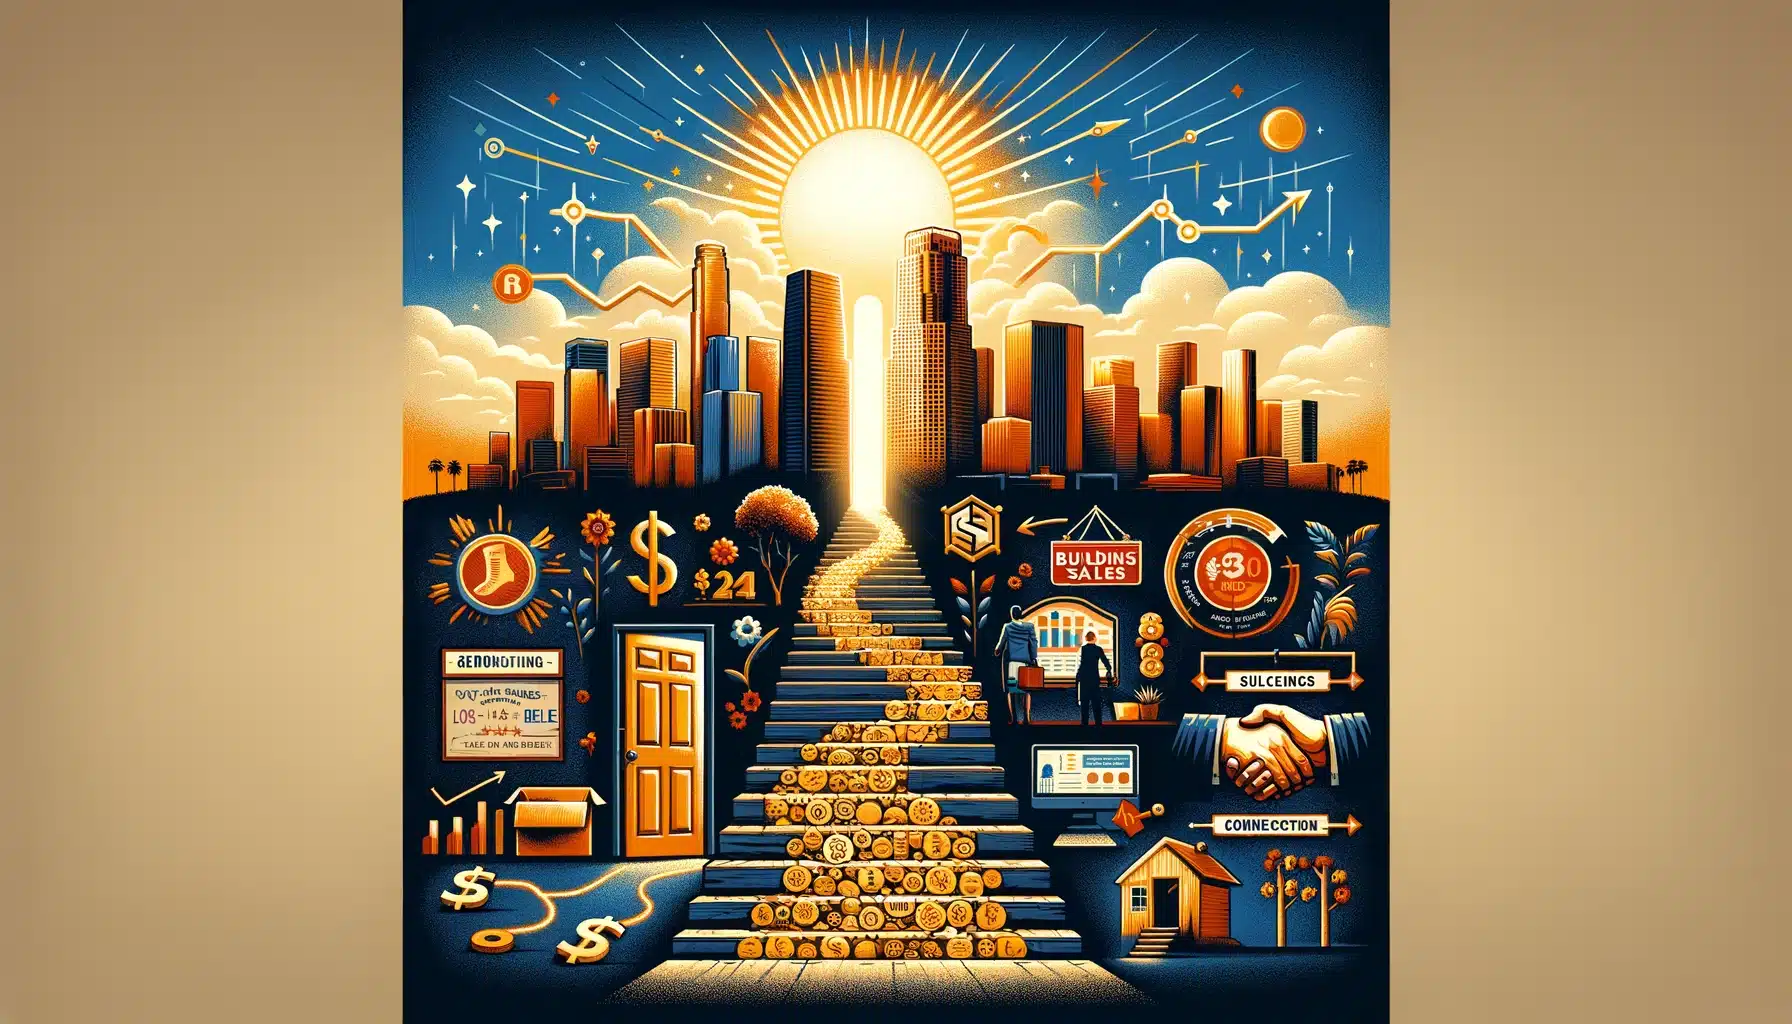 A vibrant, stylized illustration depicting the journey and mechanics of roofing sales success with symbolic elements such as currency, graphs, and handshake, set against a backdrop of a glowing city skyline.